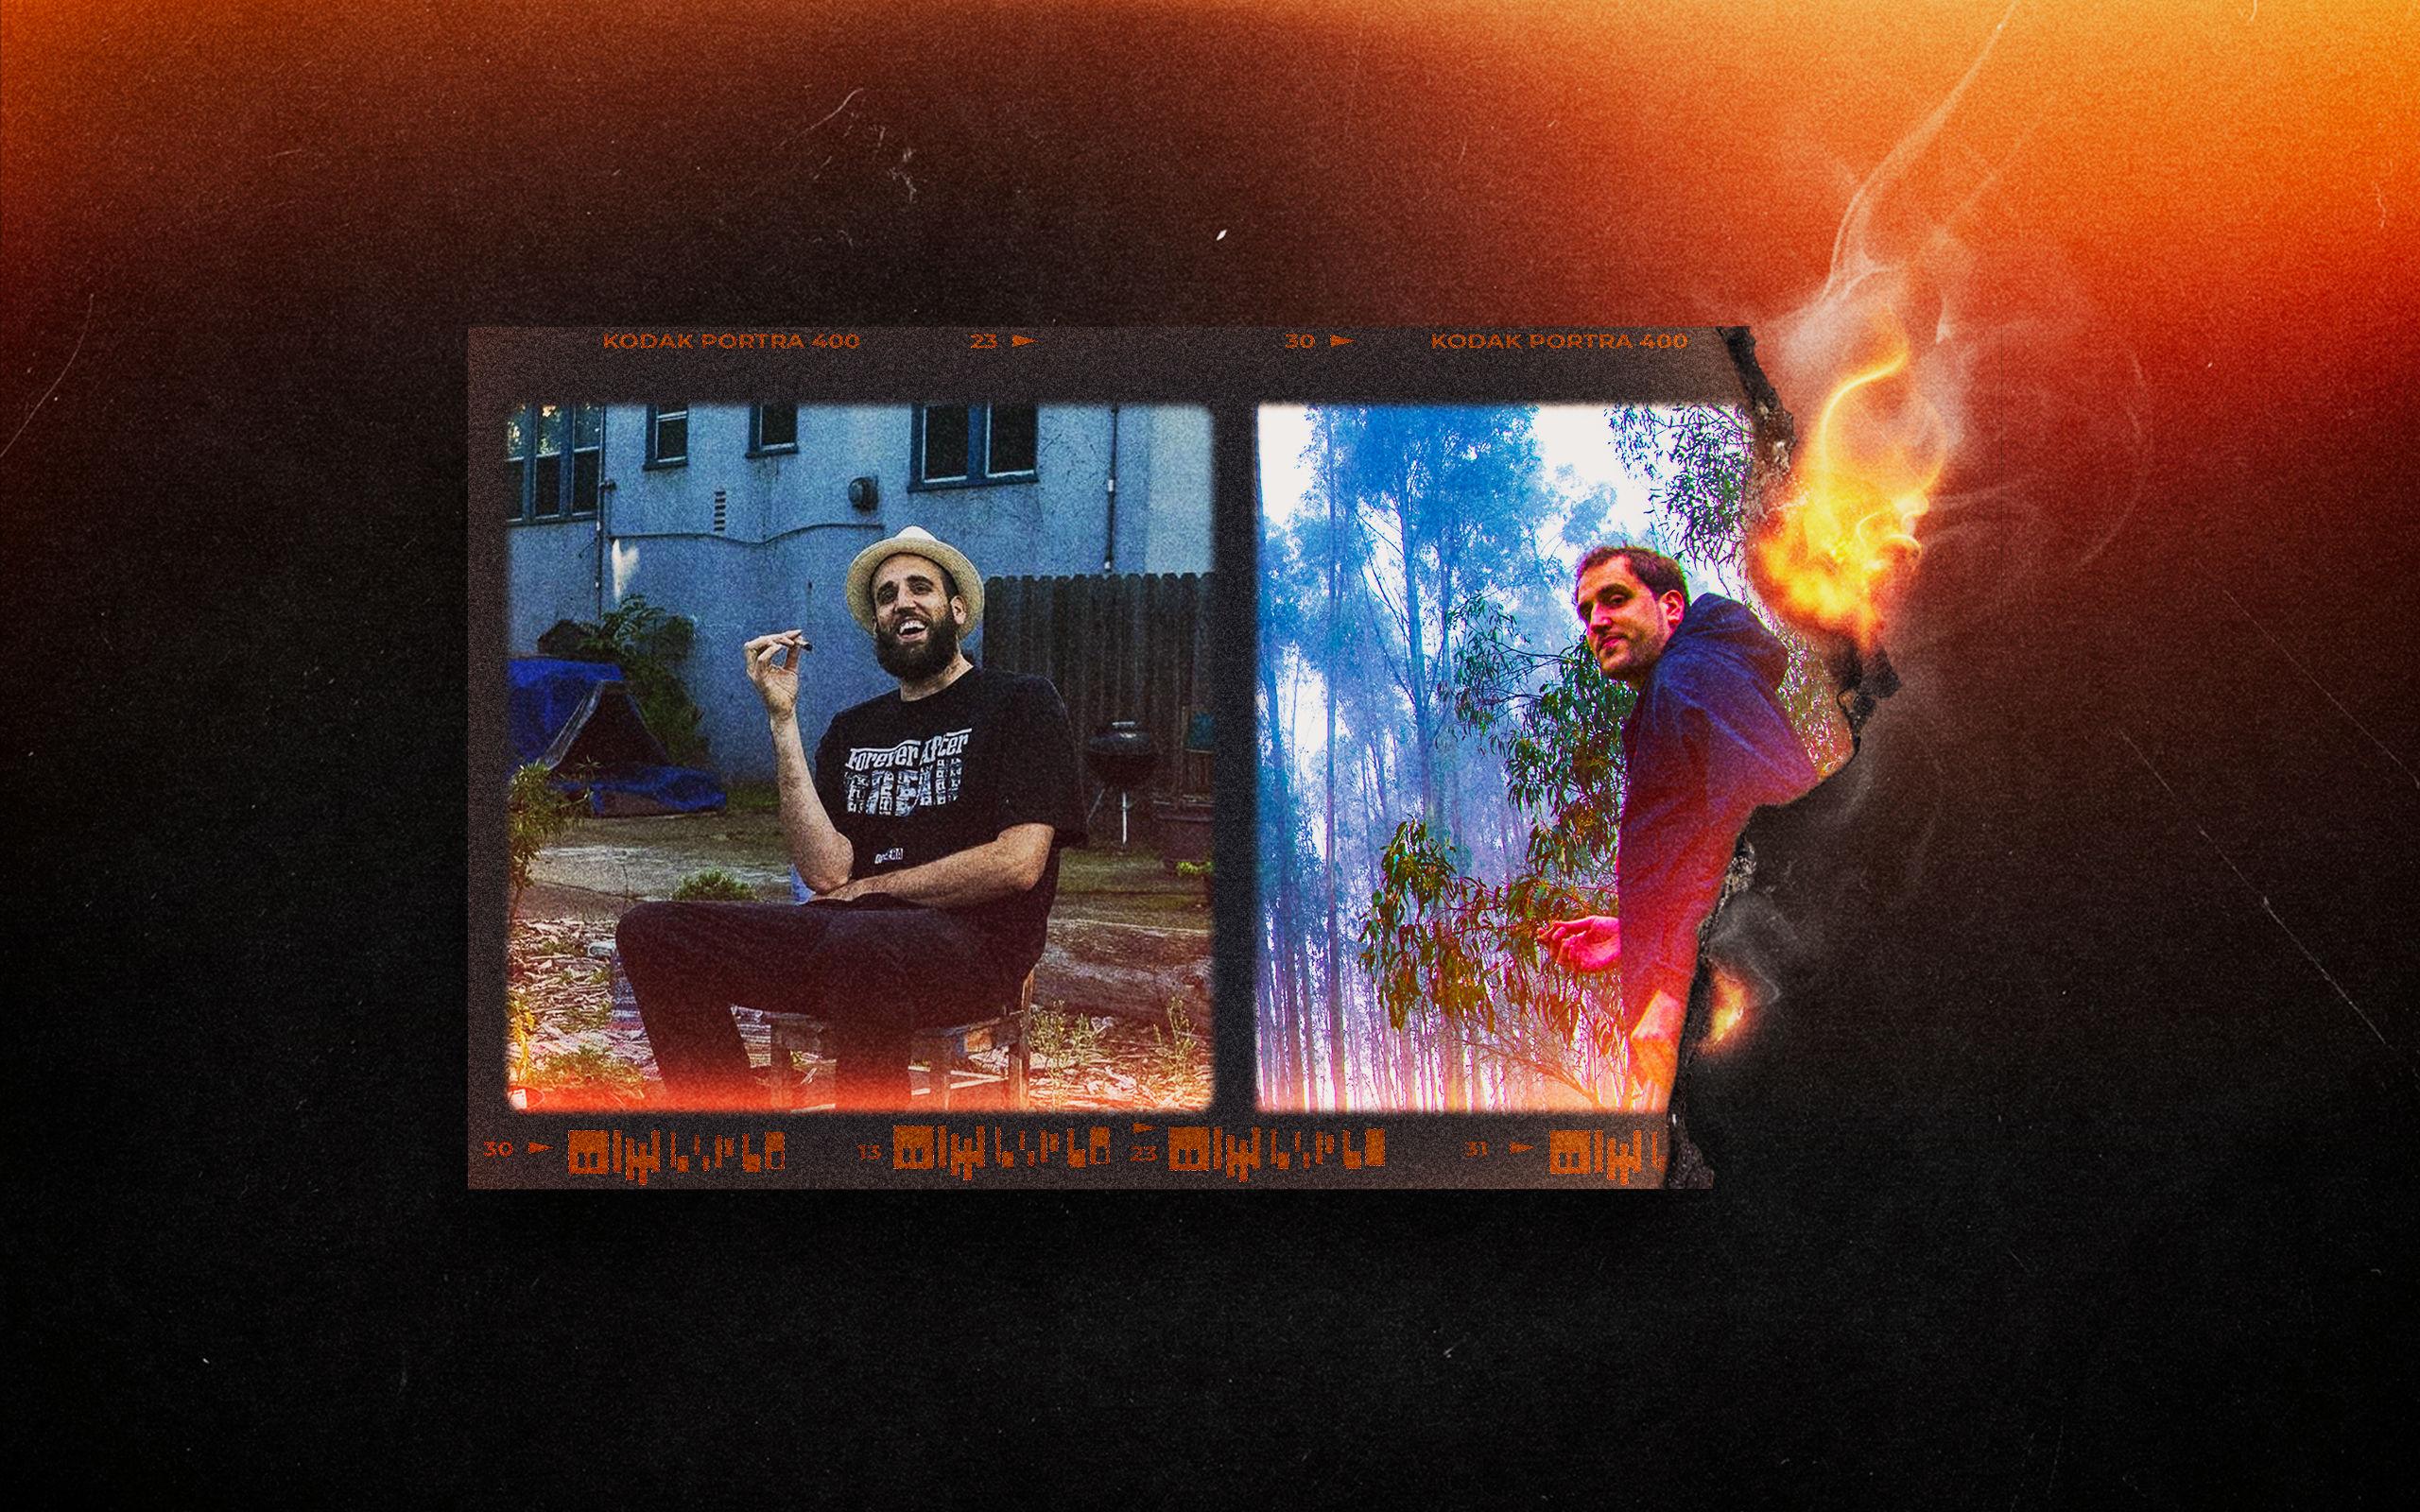 Two photos of the artist Stak on vintage film that looks like its burning